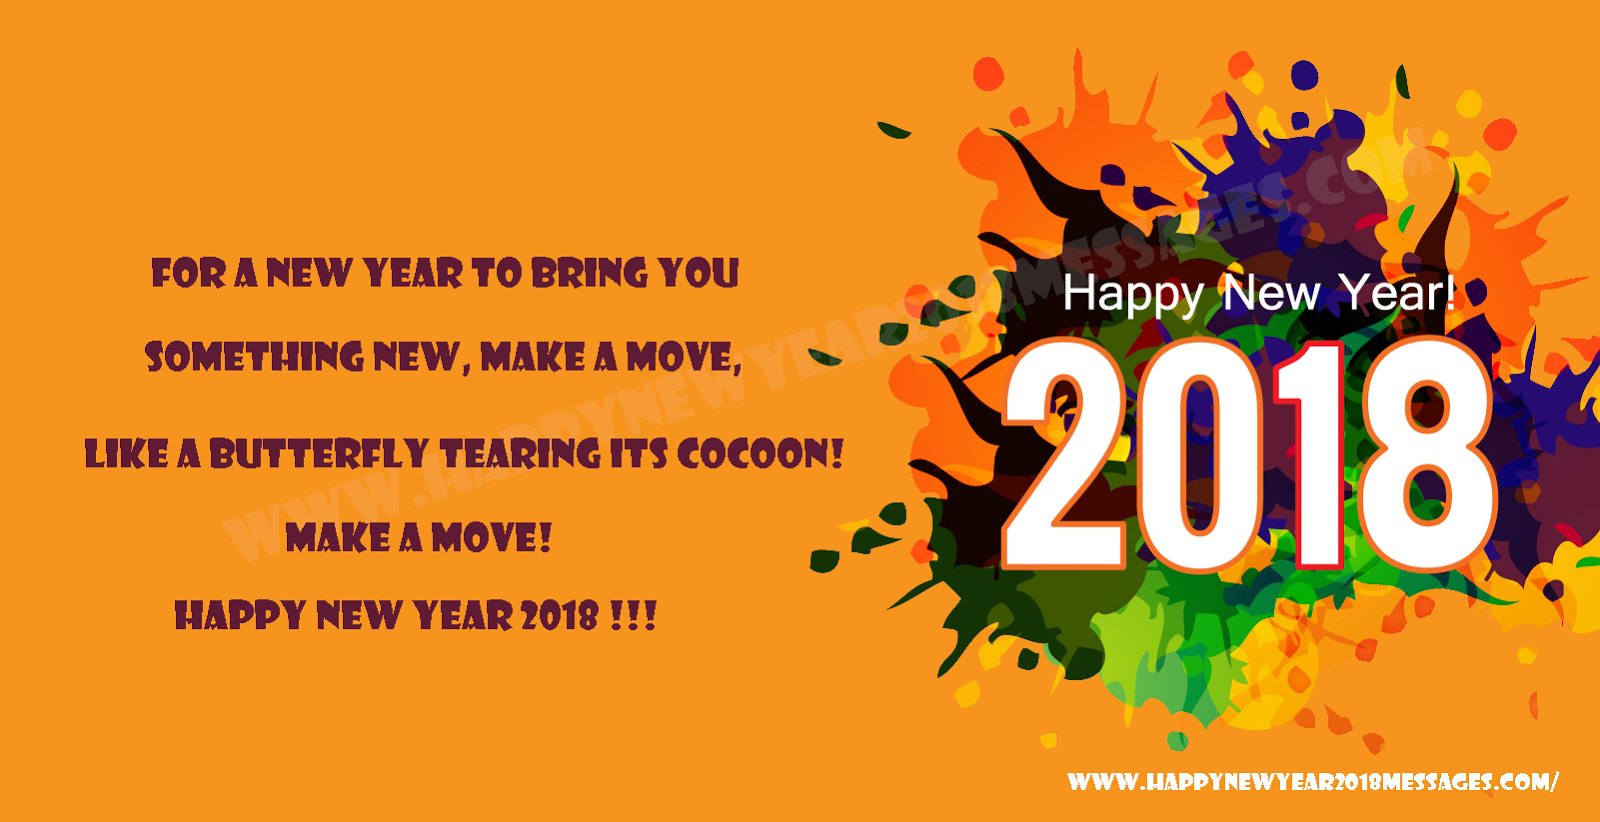 For a new year to bring you something new, make a move, like a butterfly tearing its cocoon make a move Happy New Year 2018